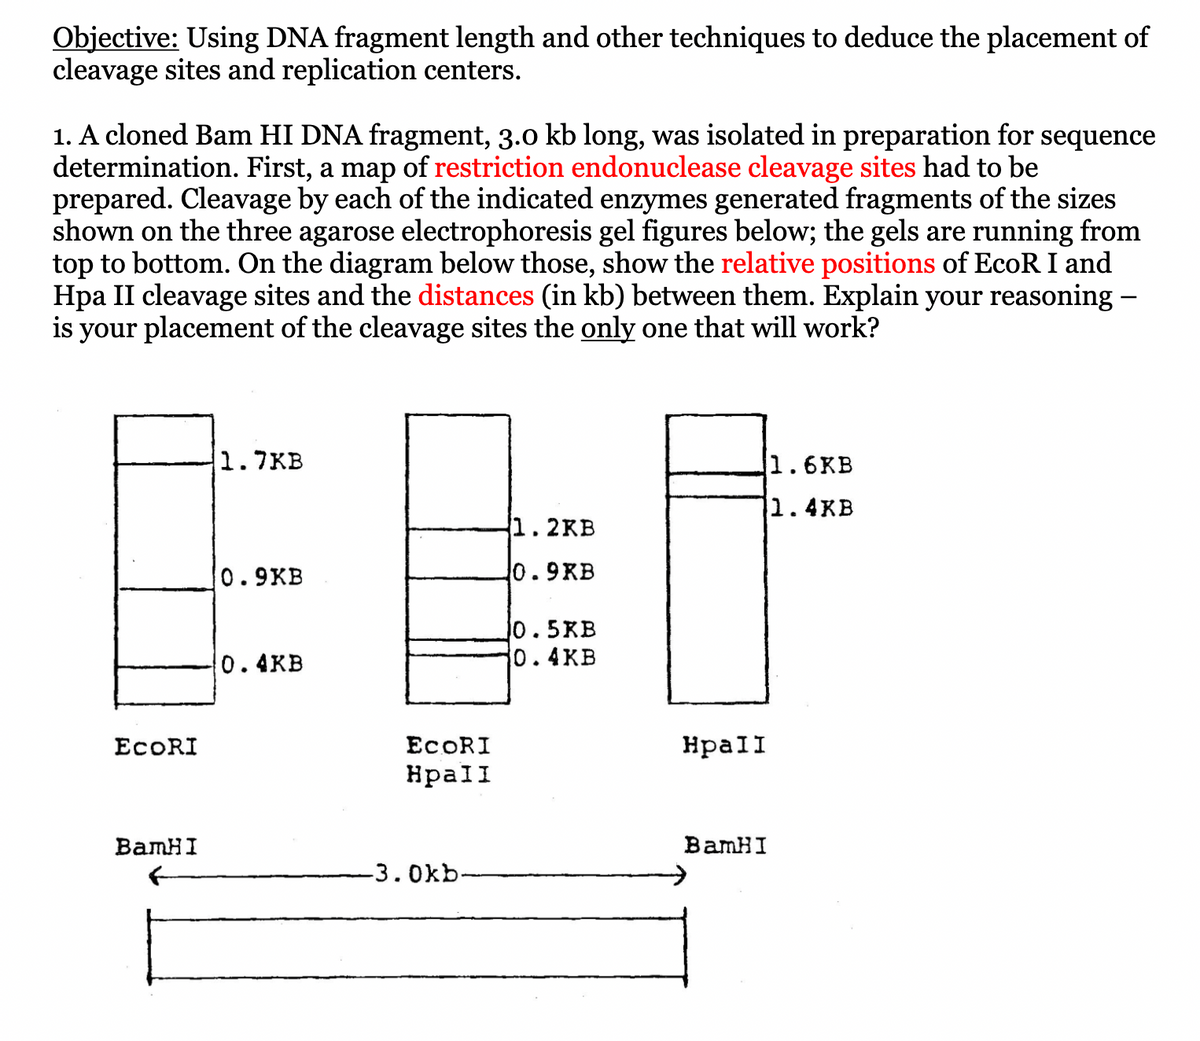 Objective: Using DNA fragment length and other techniques to deduce the placement of
cleavage sites and replication centers.
1. A cloned Bam HI DNA fragment, 3.0 kb long, was isolated in preparation for sequence
determination. First, a map of restriction endonuclease cleavage sites had to be
prepared. Cleavage by each of the indicated enzymes generated fragments of the sizes
shown on the three agarose electrophoresis gel figures below; the gels are running from
top to bottom. On the diagram below those, show the relative positions of EcoR I and
Hpa II cleavage sites and the distances (in kb) between them. Explain your reasoning -
is your placement of the cleavage sites the only one that will work?
ECORI
BamHI
1.7КВ
0.9KB
0.4KB
ECORI
Hpall
-3.0kb-
1.2KB
0.9KB
10.5KB
0.4KB
Hpall
BamHI
1.6KB
1.4KB